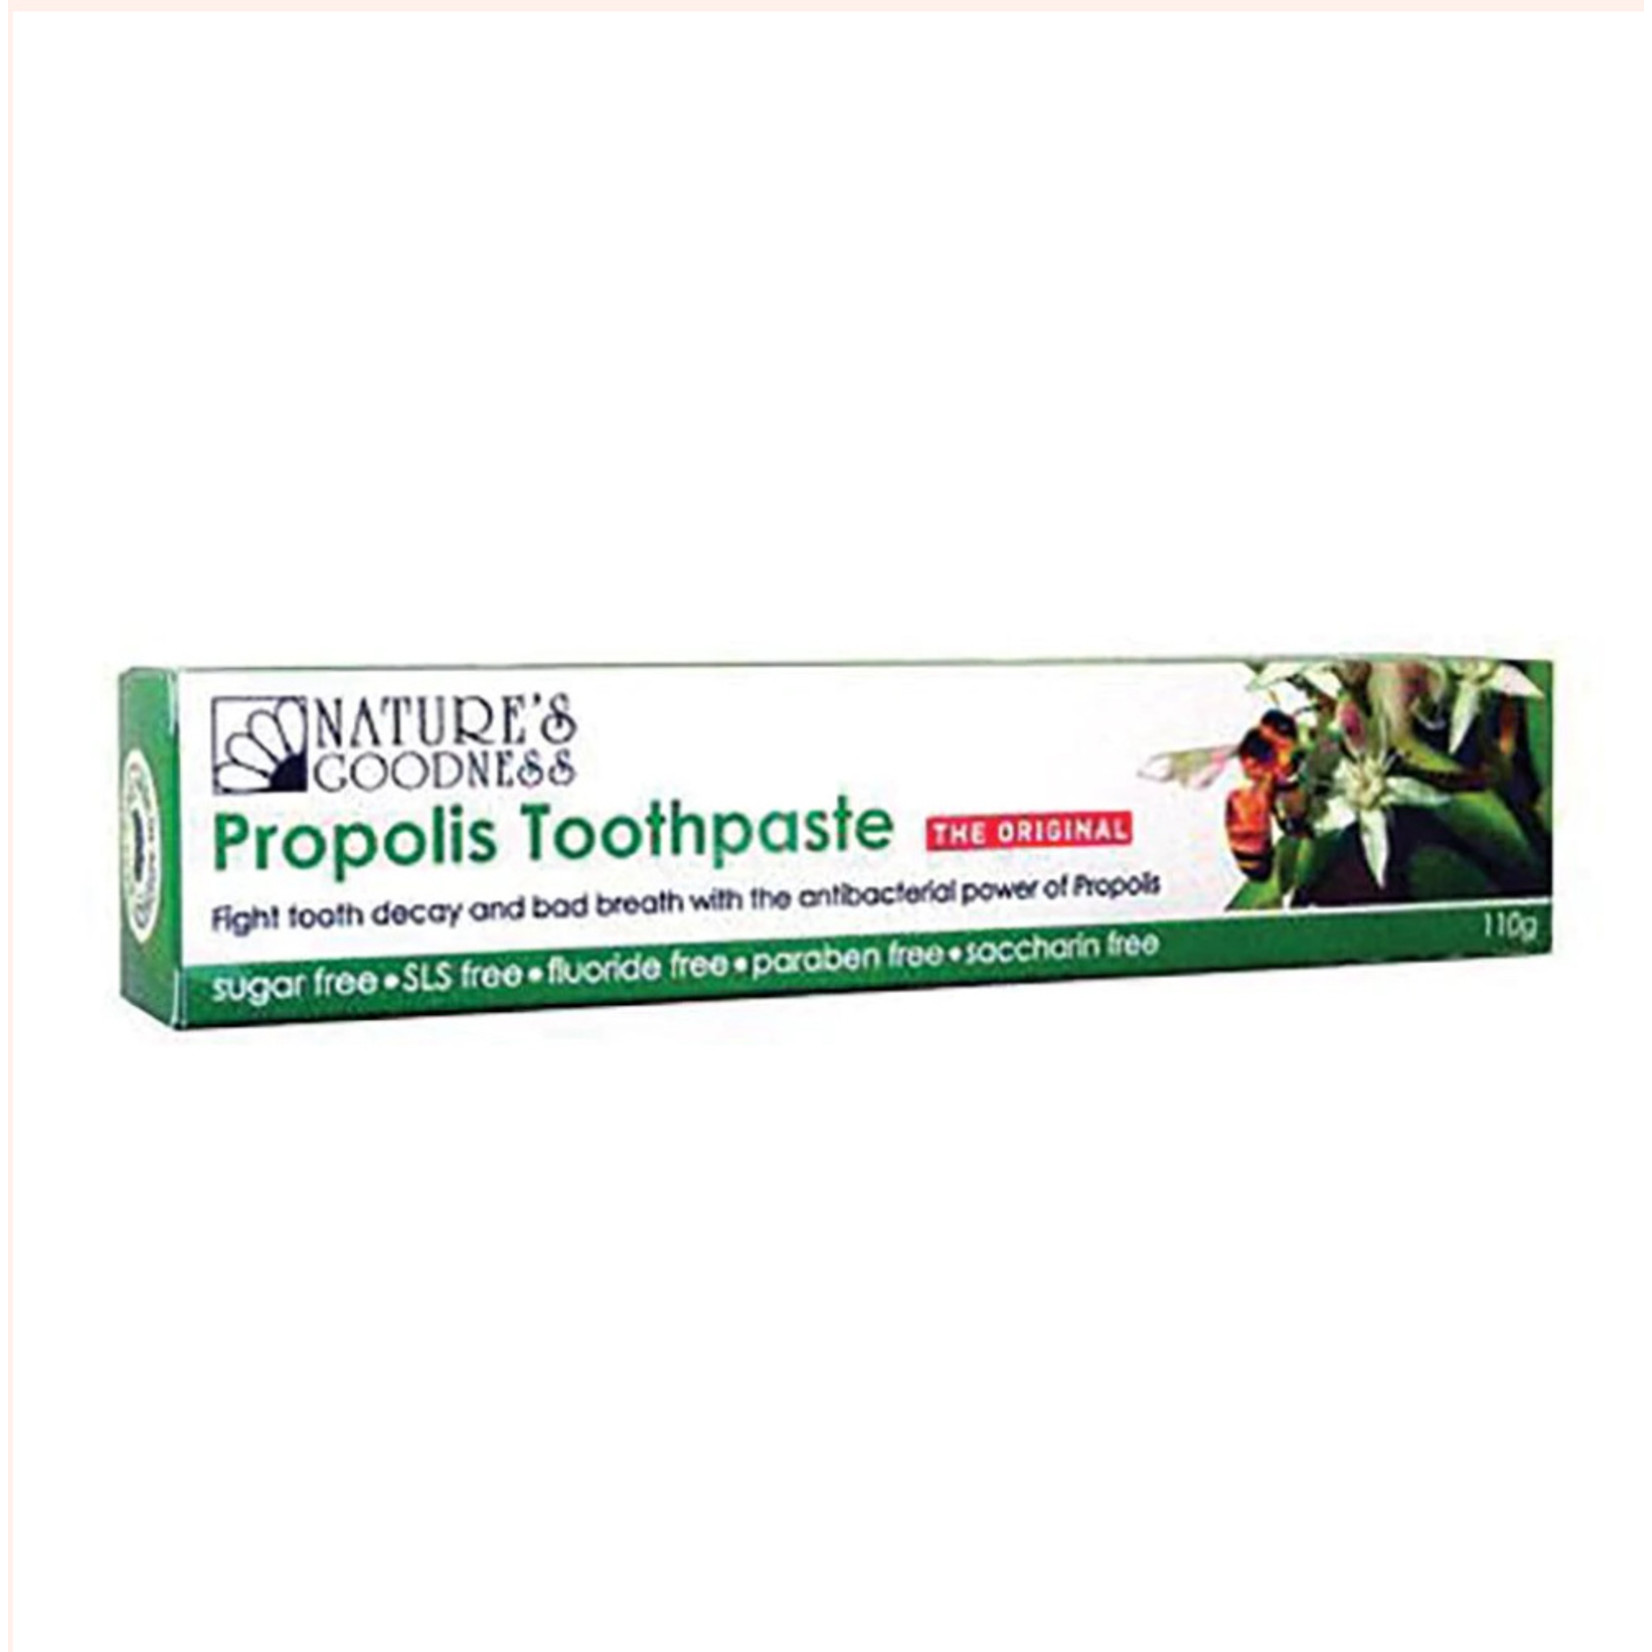 Natures Goodness Natures Goodness Propolis Toothpaste 110g